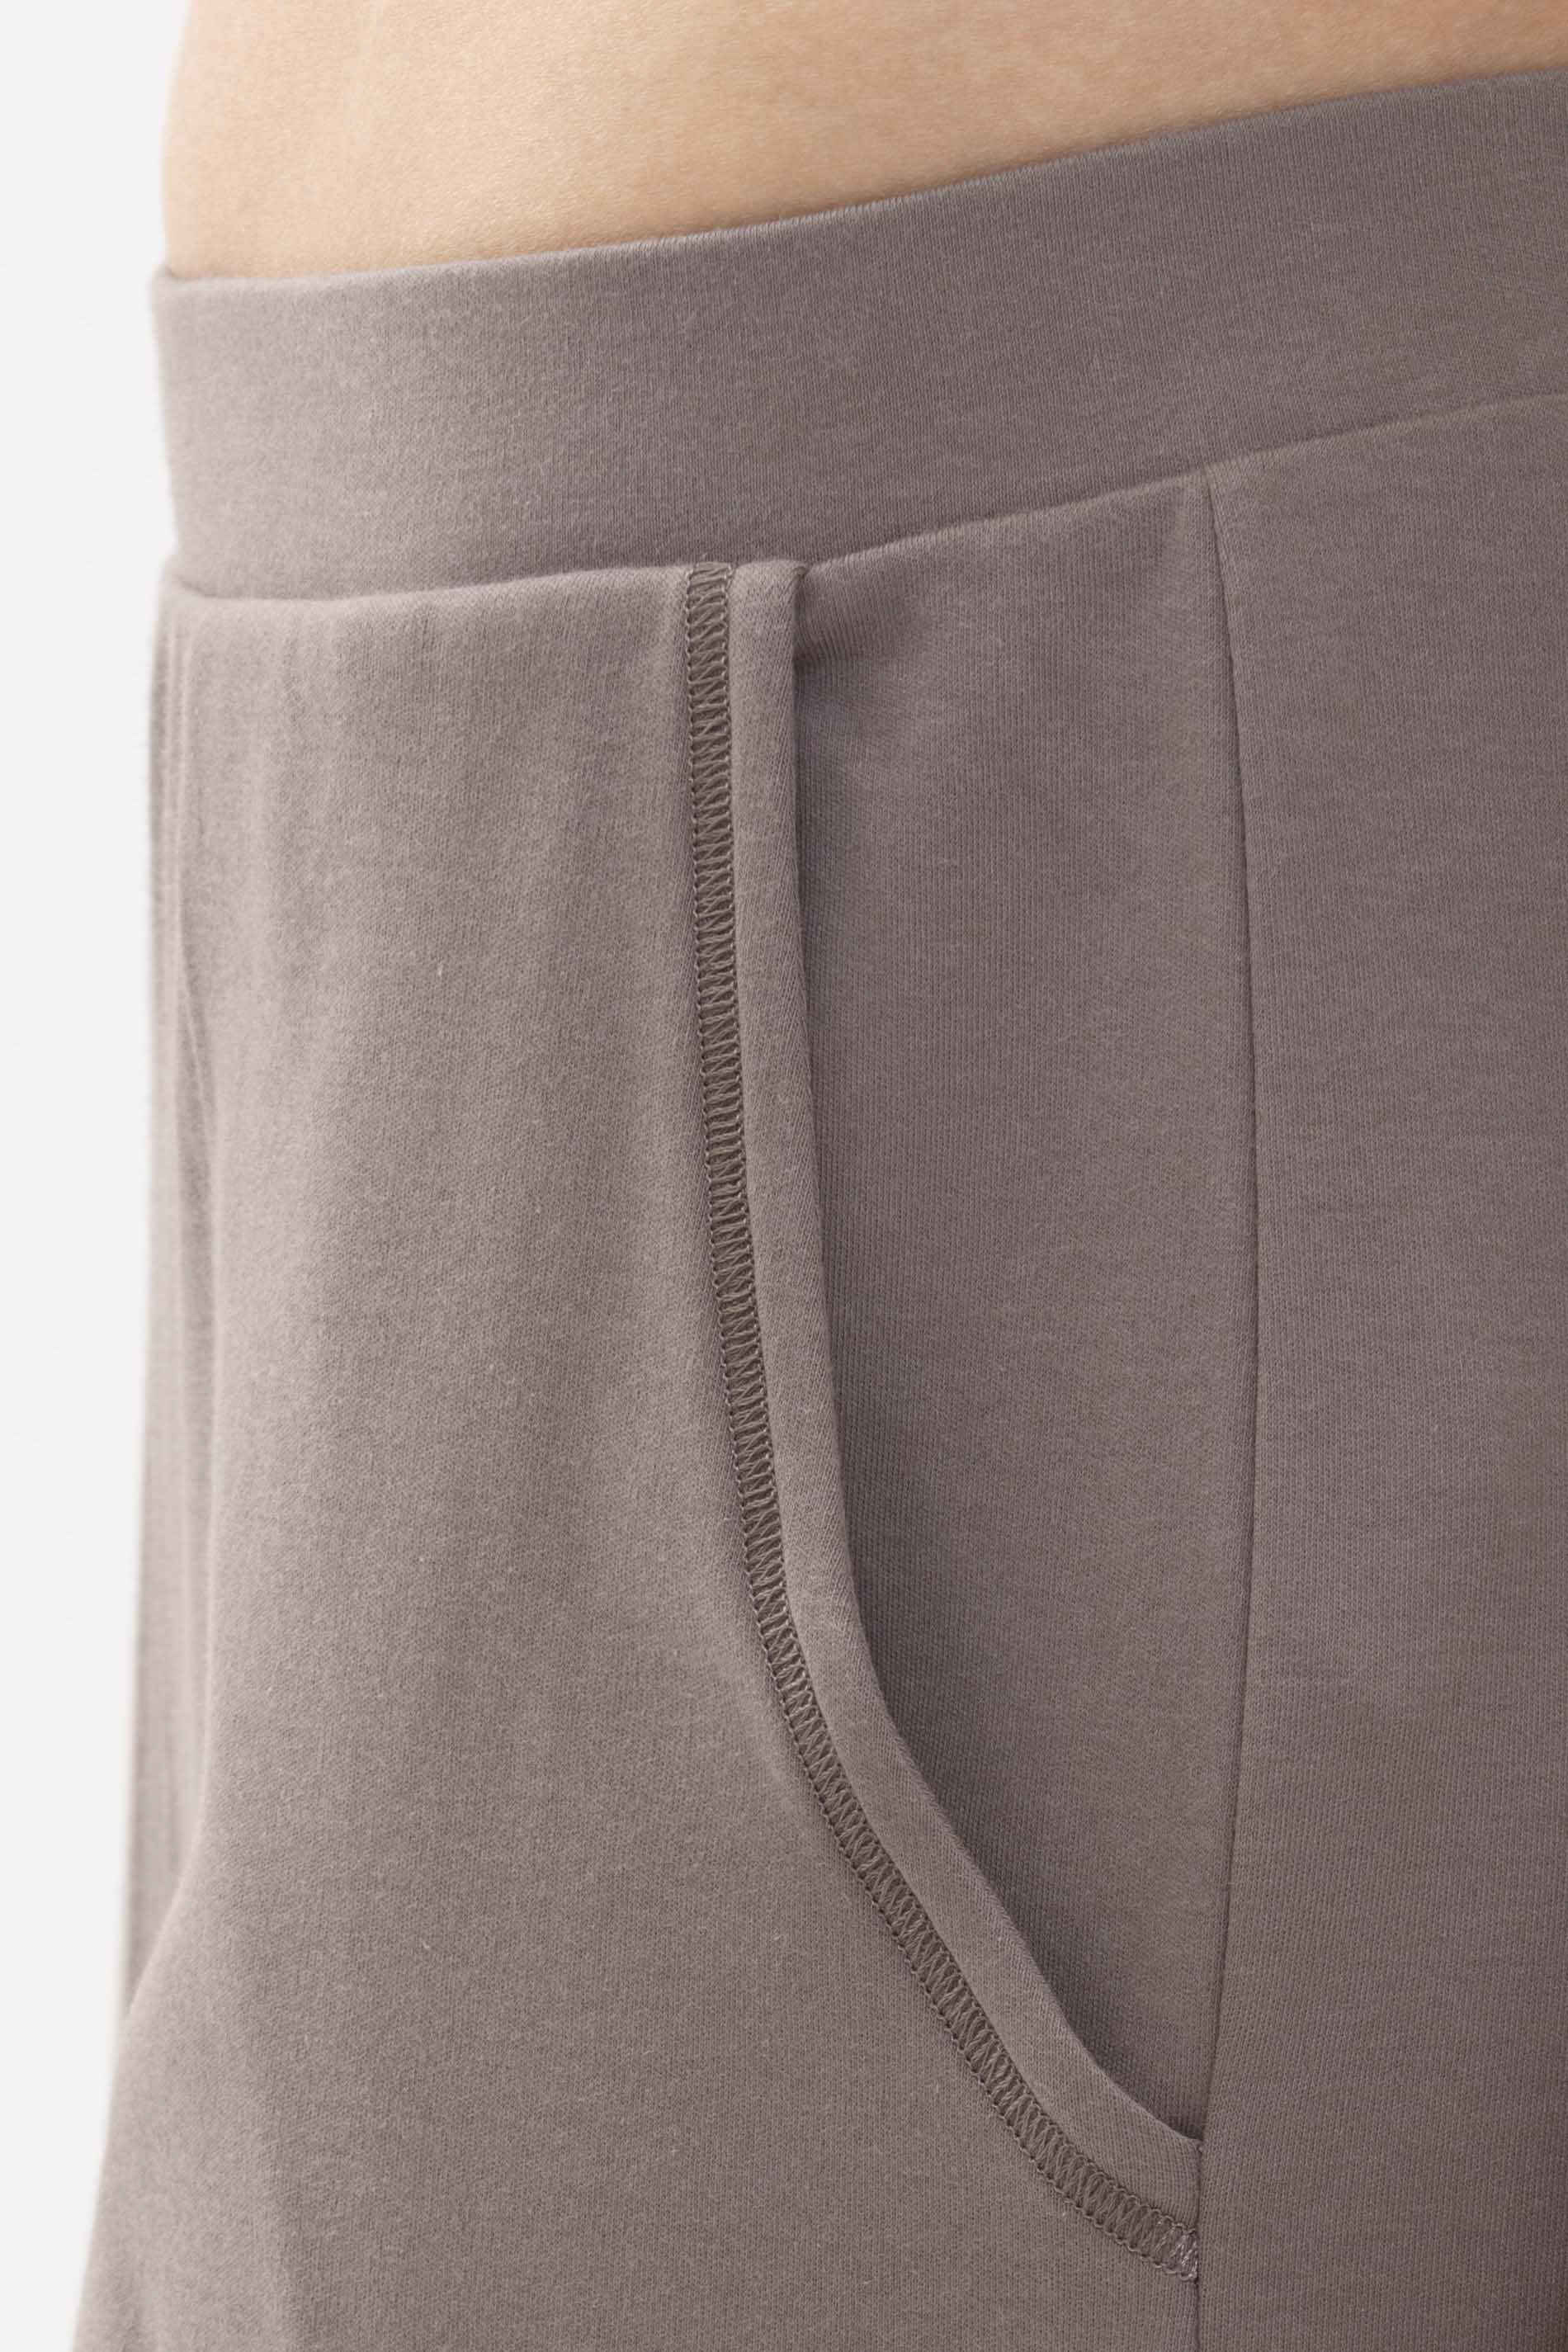 Full-length bottoms Deep Taupe Serie N8TEX 2.0 Detail View 02 | mey®